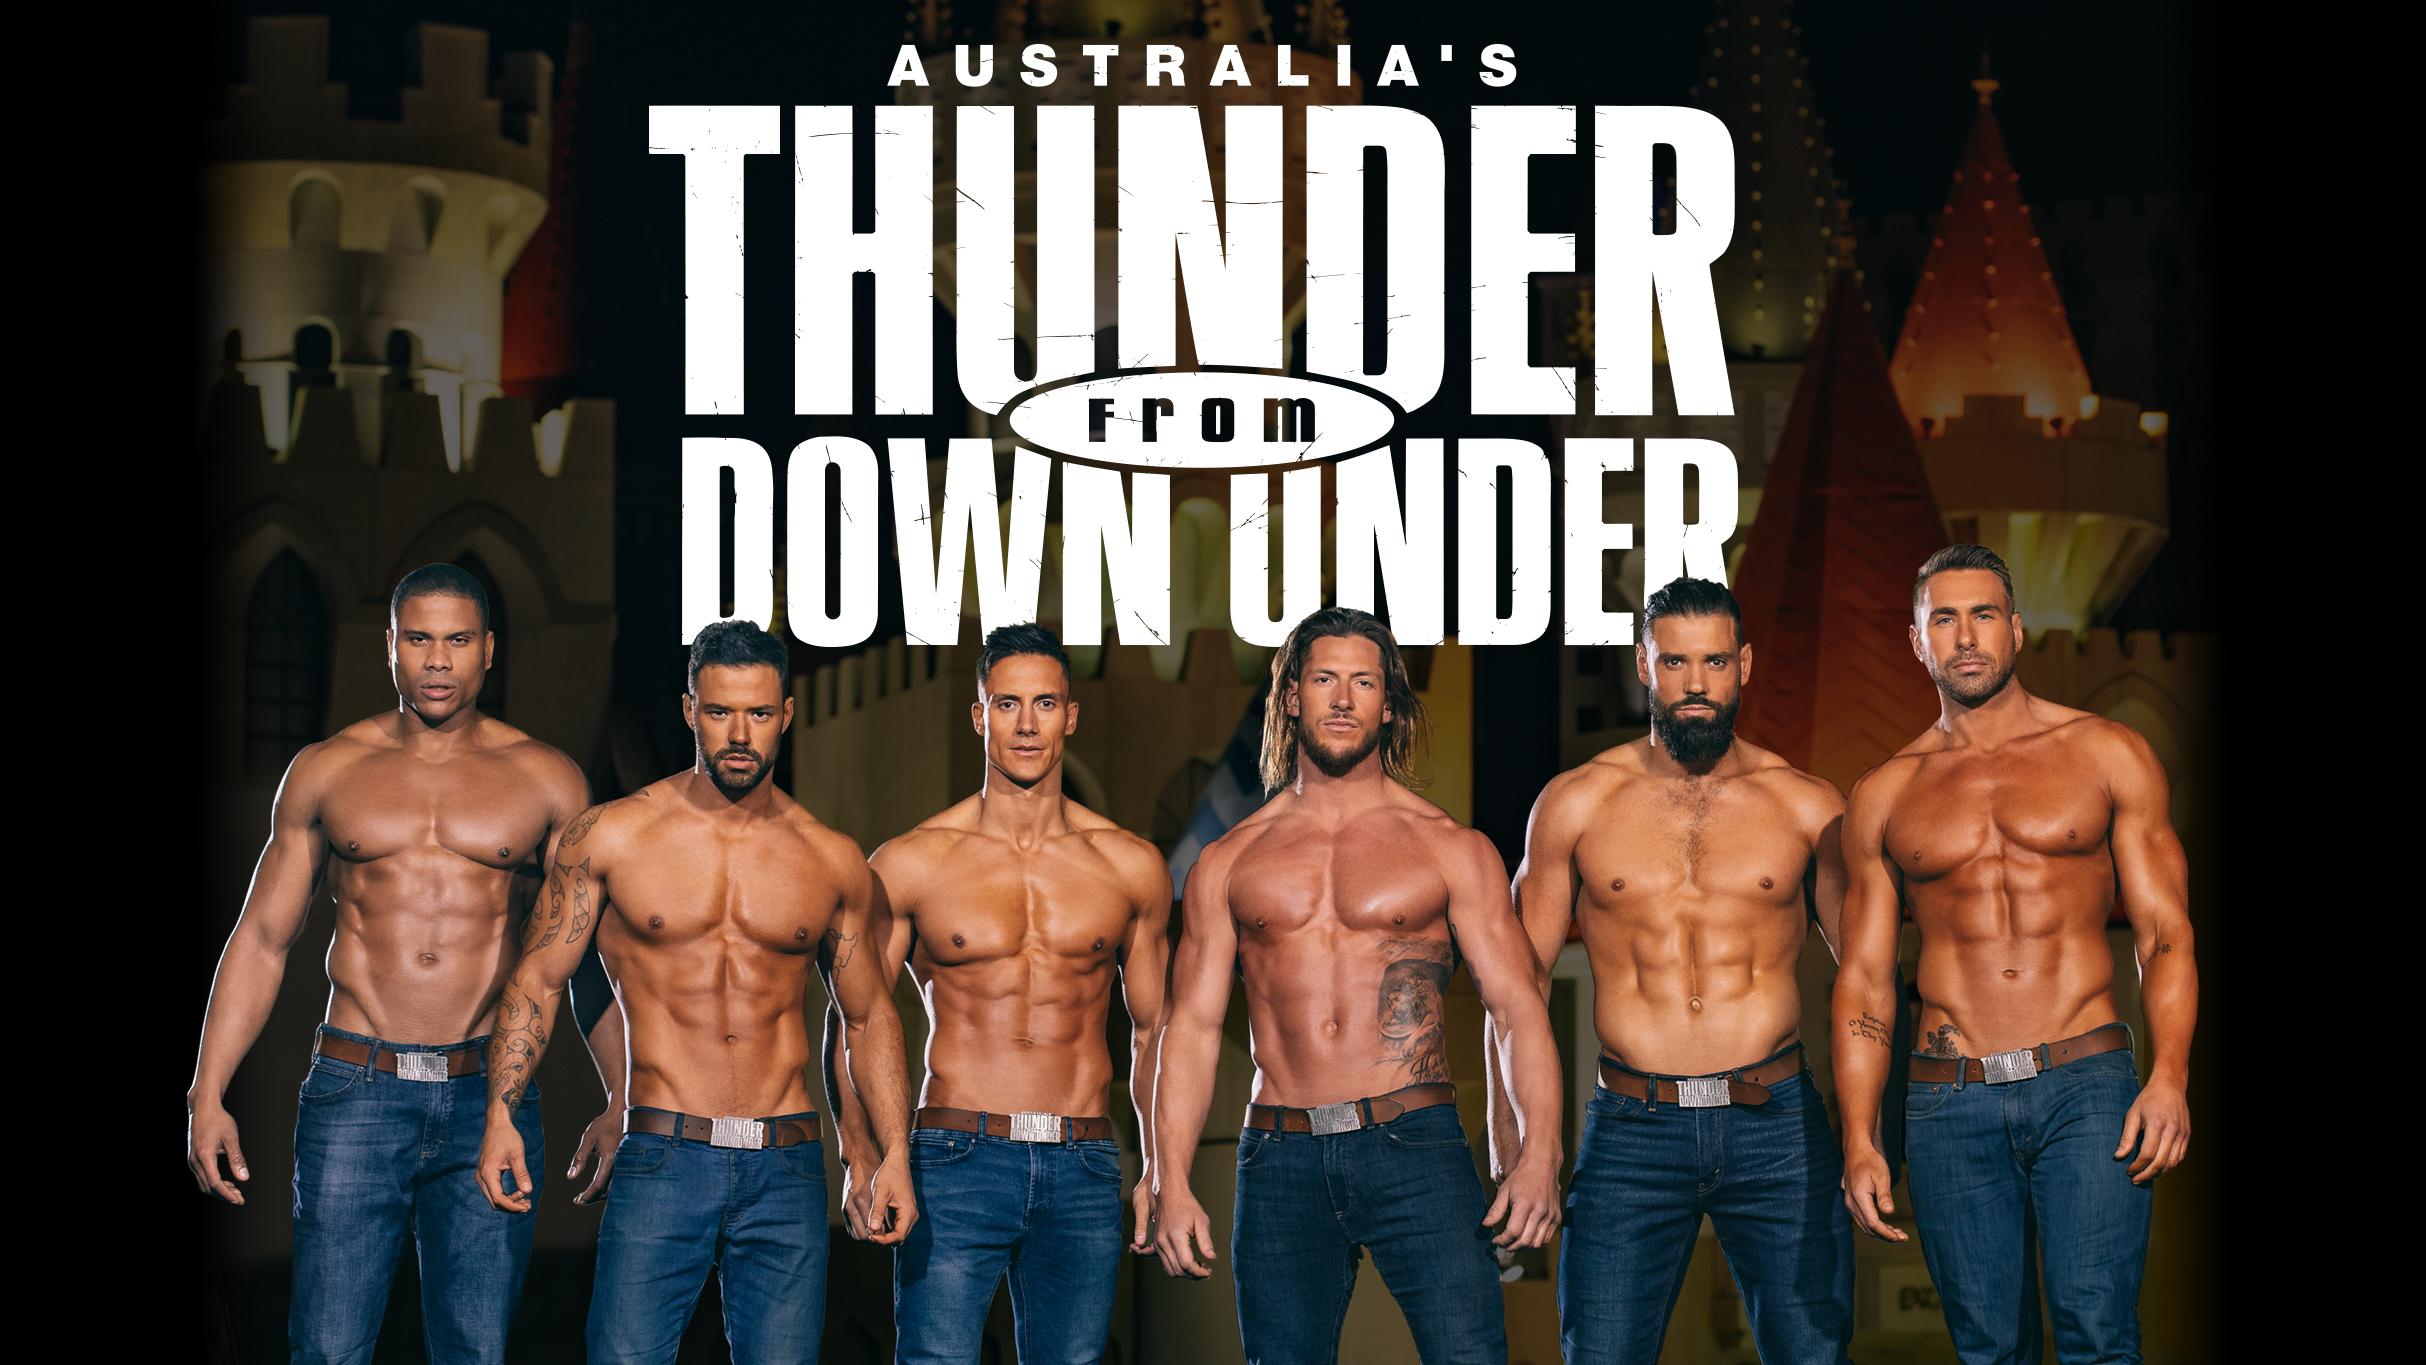 Thunder From Down Under: Untamed 2024 Tour - 19+ Event